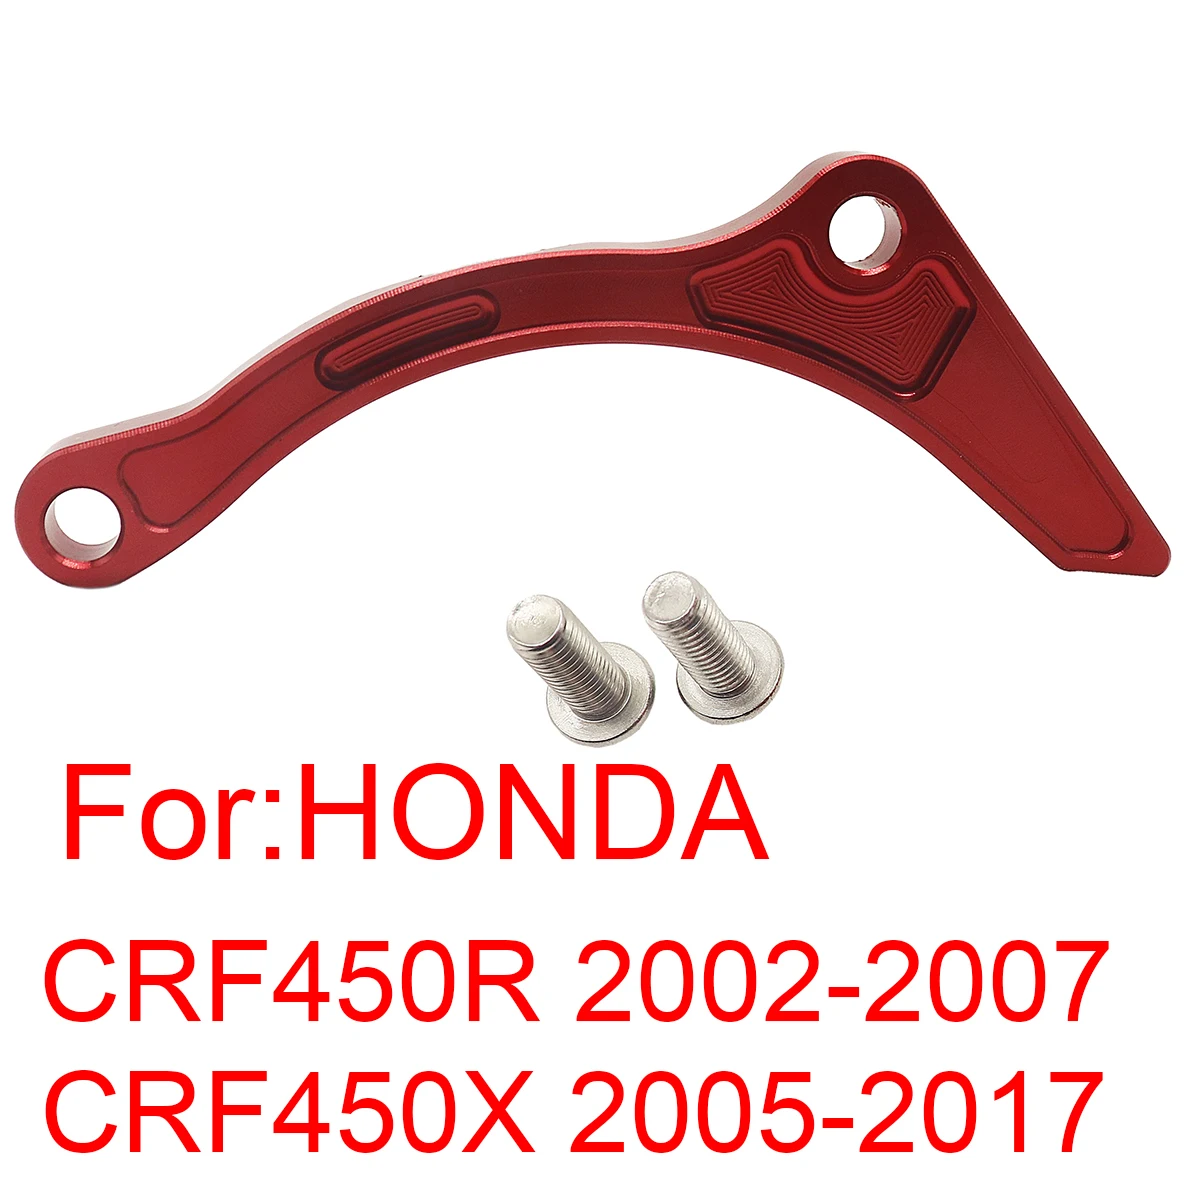 

Motorcycle CNC Machined Case Saver Engine Protector For HONDA CRF450R CRF 450R 02-07 CRF450X CRF 450X 05-17